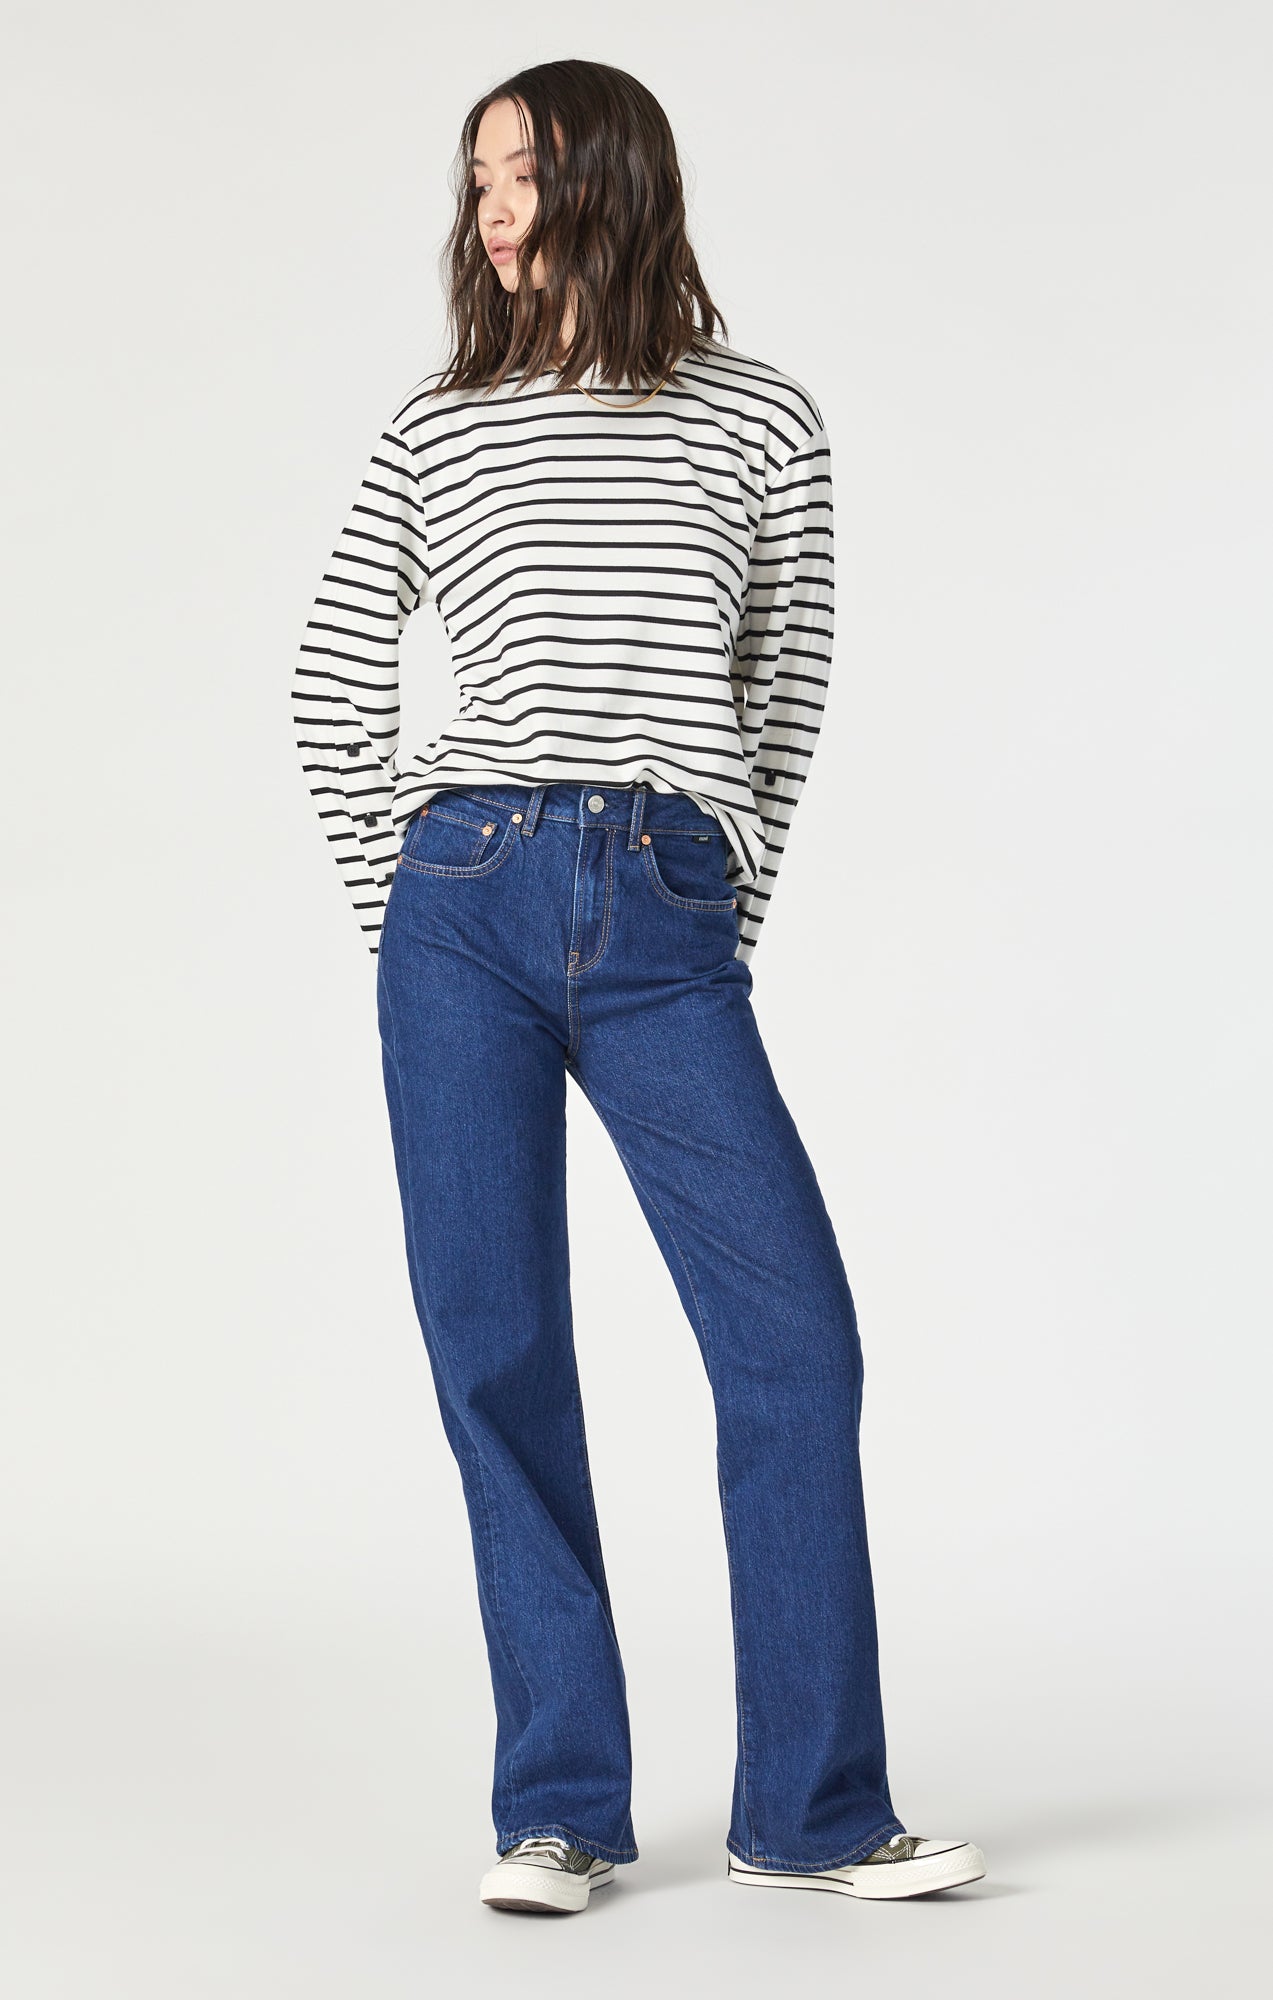 YMI Junior's Classic High Rise Flare Bell Bottom Jeans - Tall Long Inseam  34